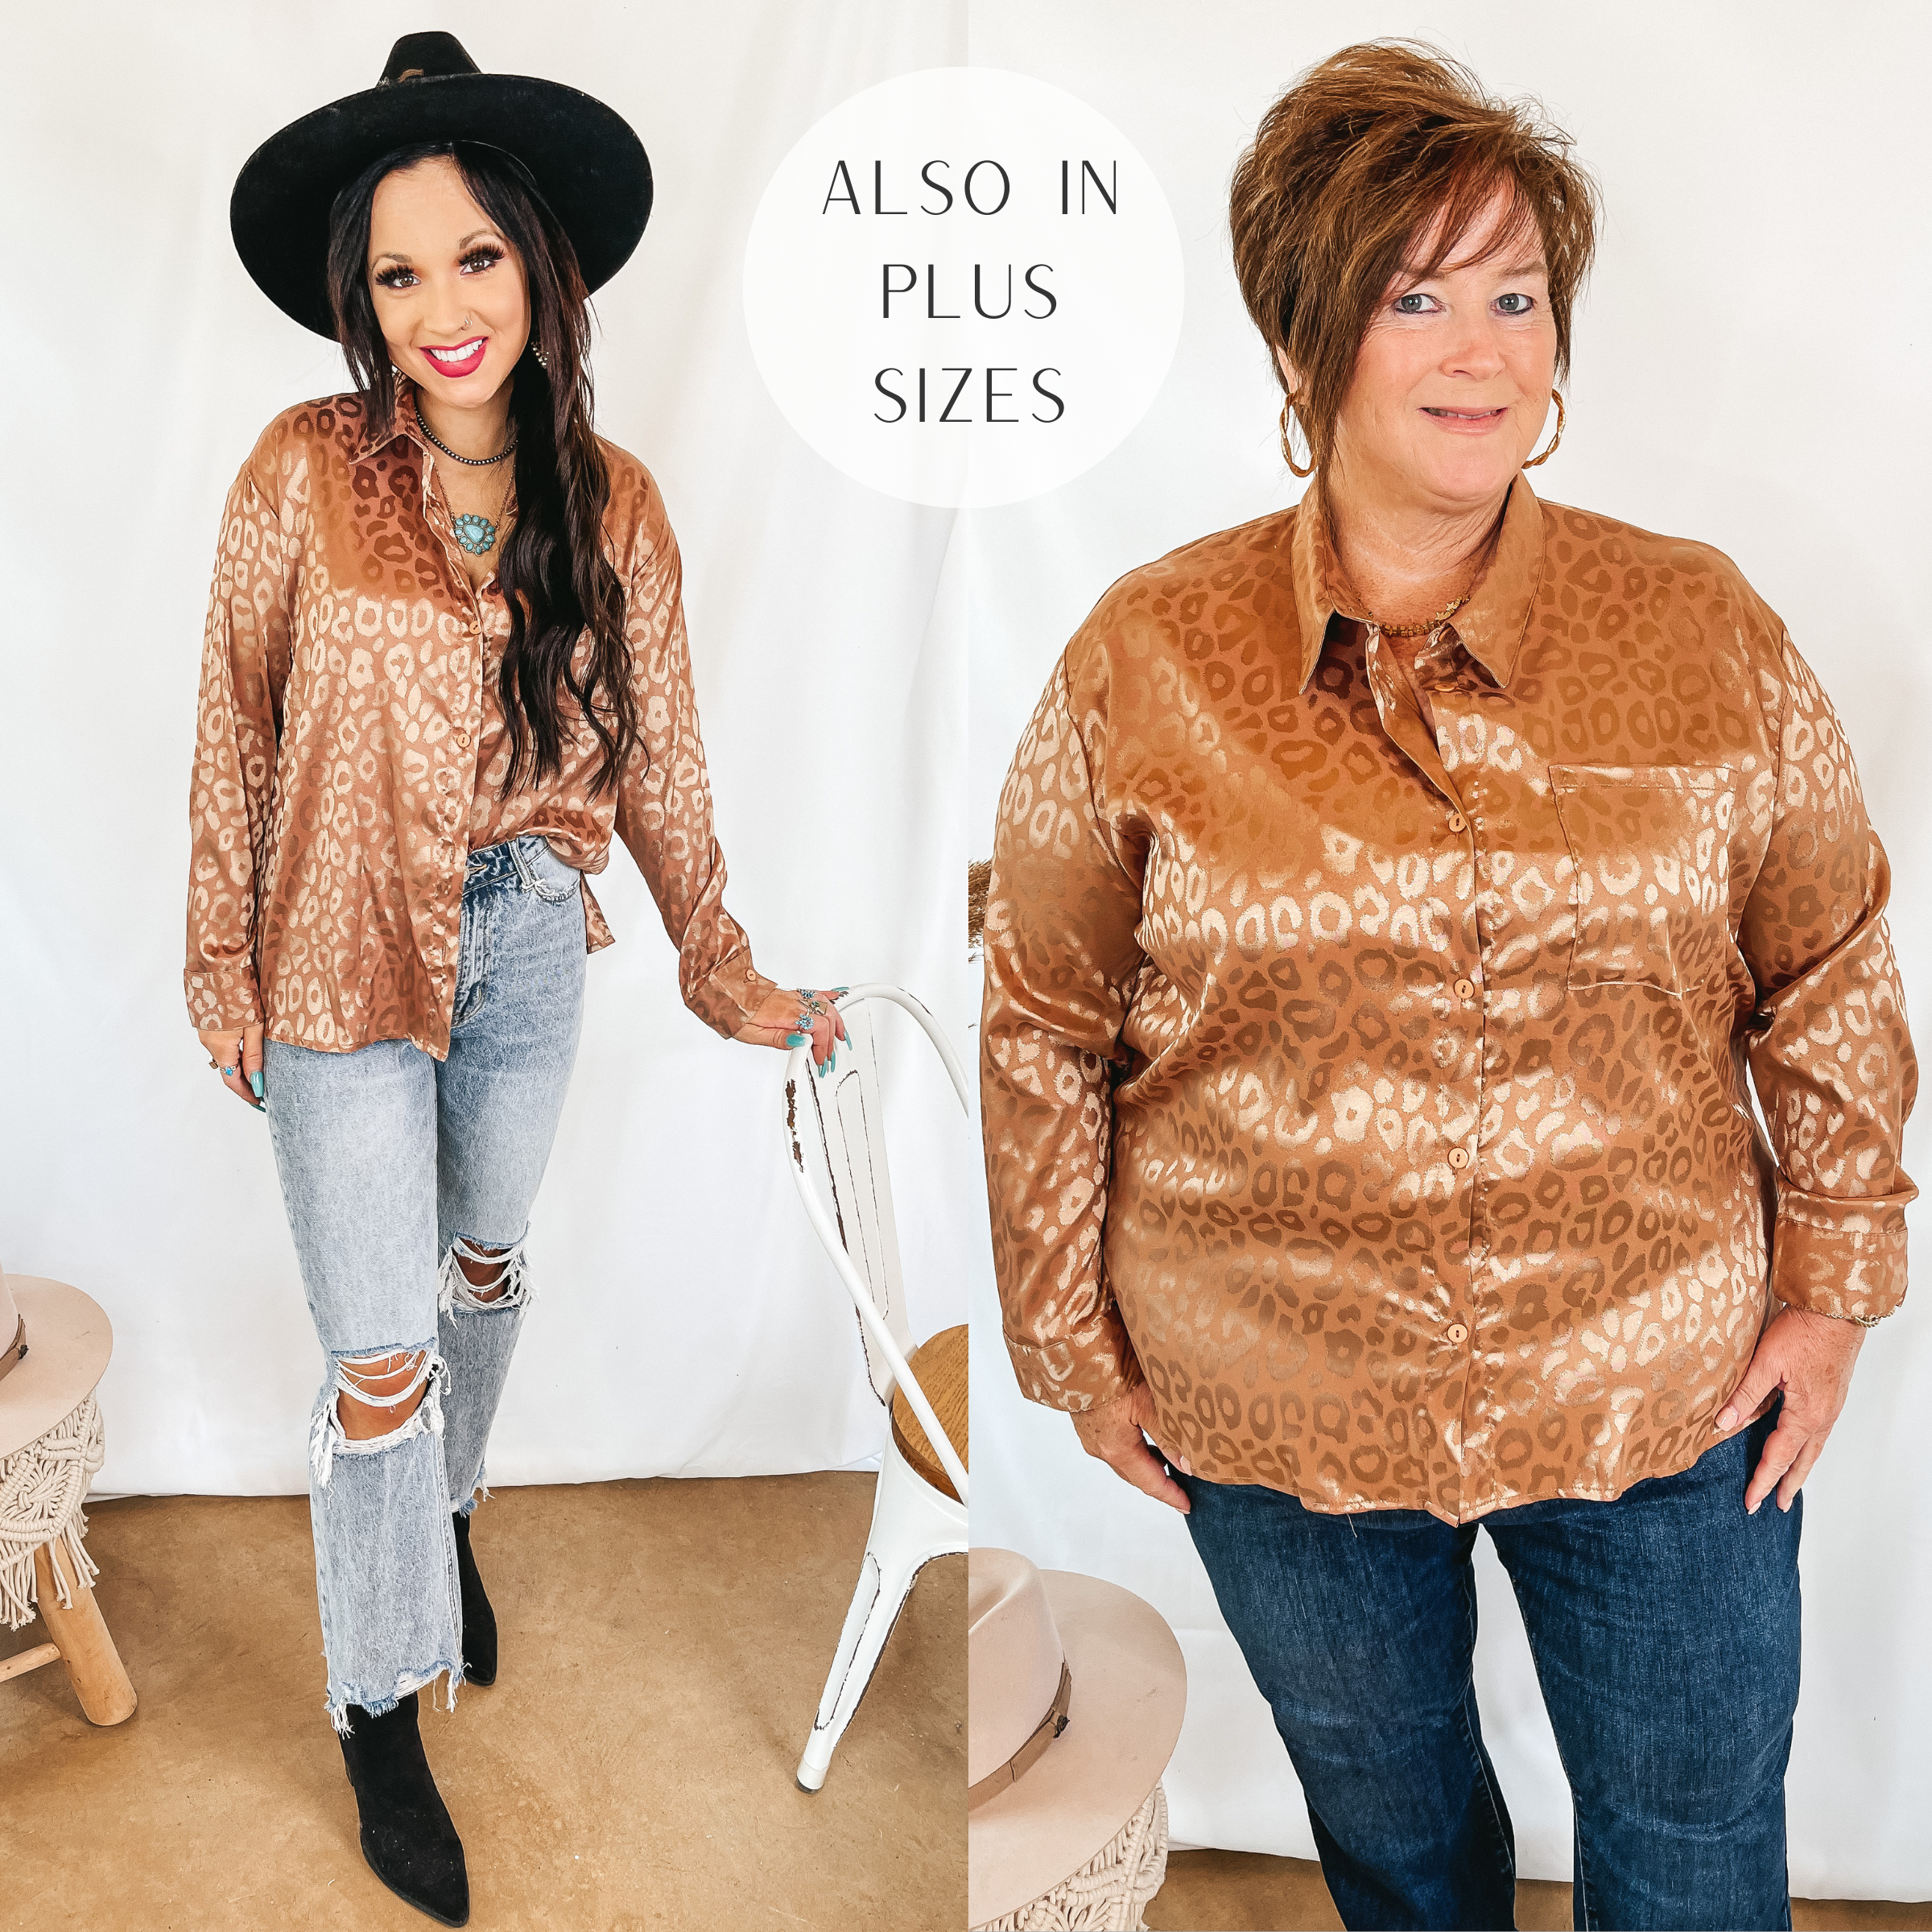 Models are wearing a long sleeve satin copper top. The button up top has a shiny leopard print all over. Size small model has it paired with light wash jeans, black booties, and a black hat. Plus size model has it paired with dark wash jeans and gold jewelry.